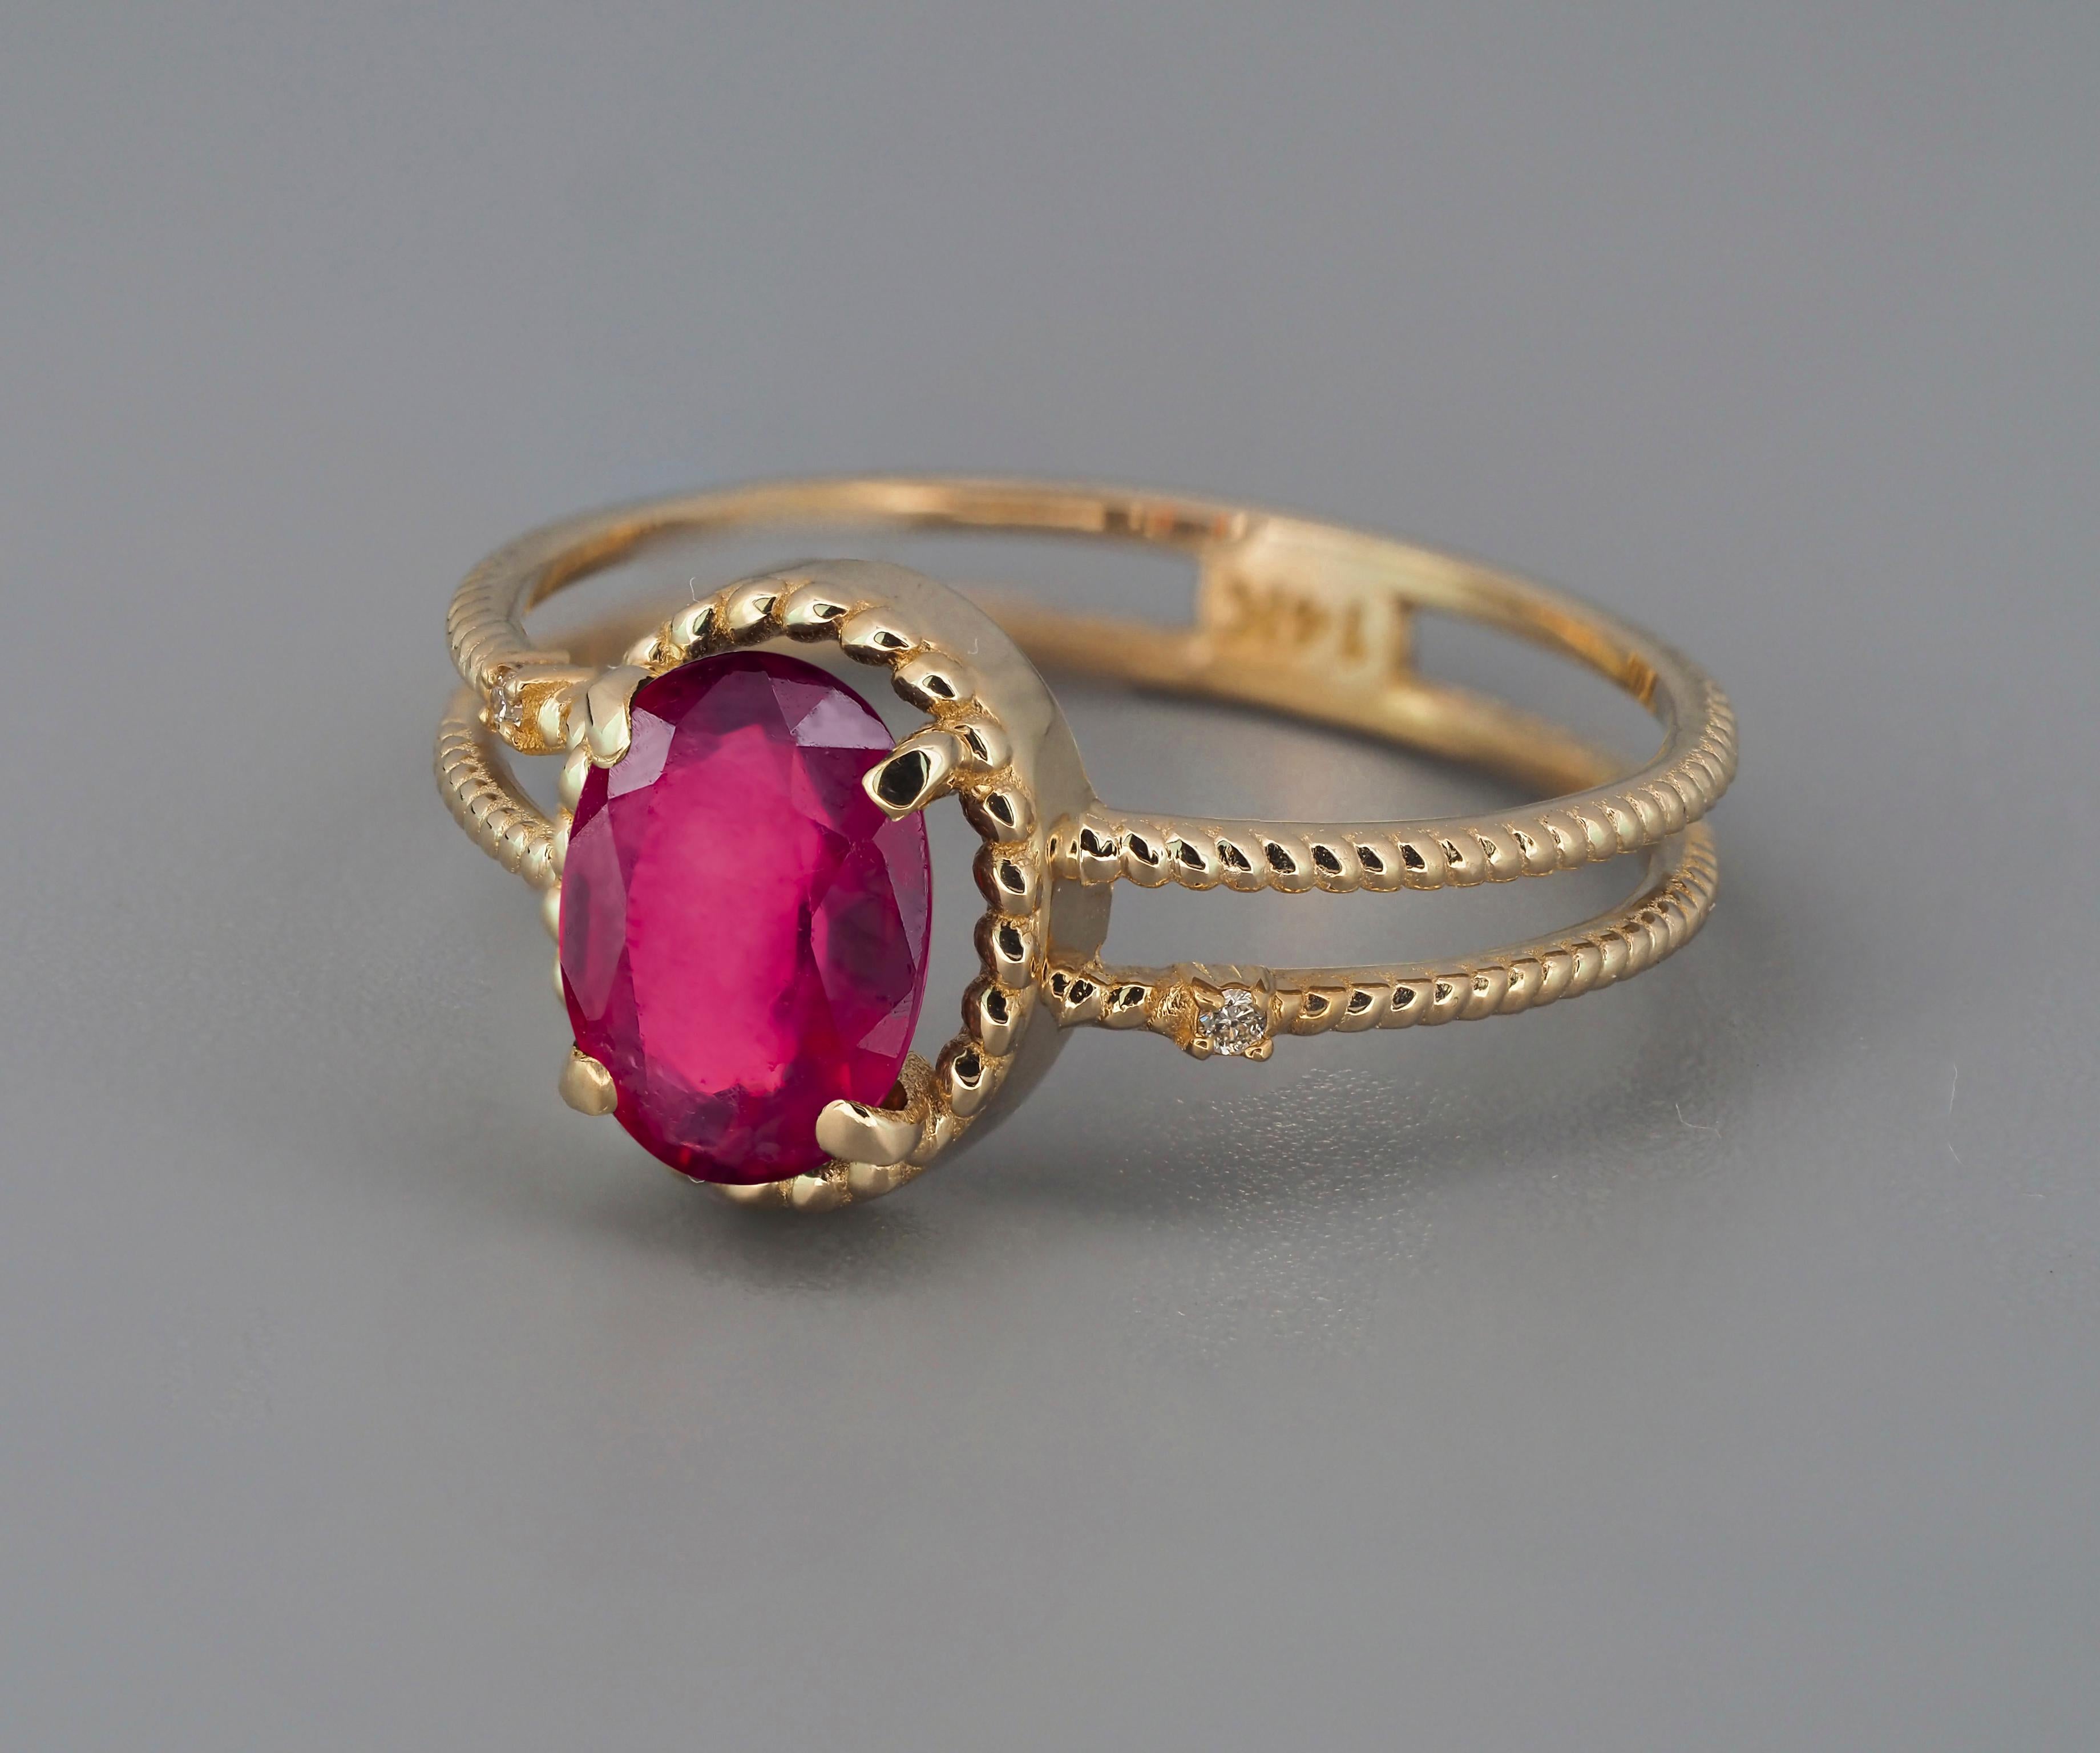 For Sale:  Oval Ruby Ring, 14k Gold Ring with Ruby, Minimalist Ruby Ring 4